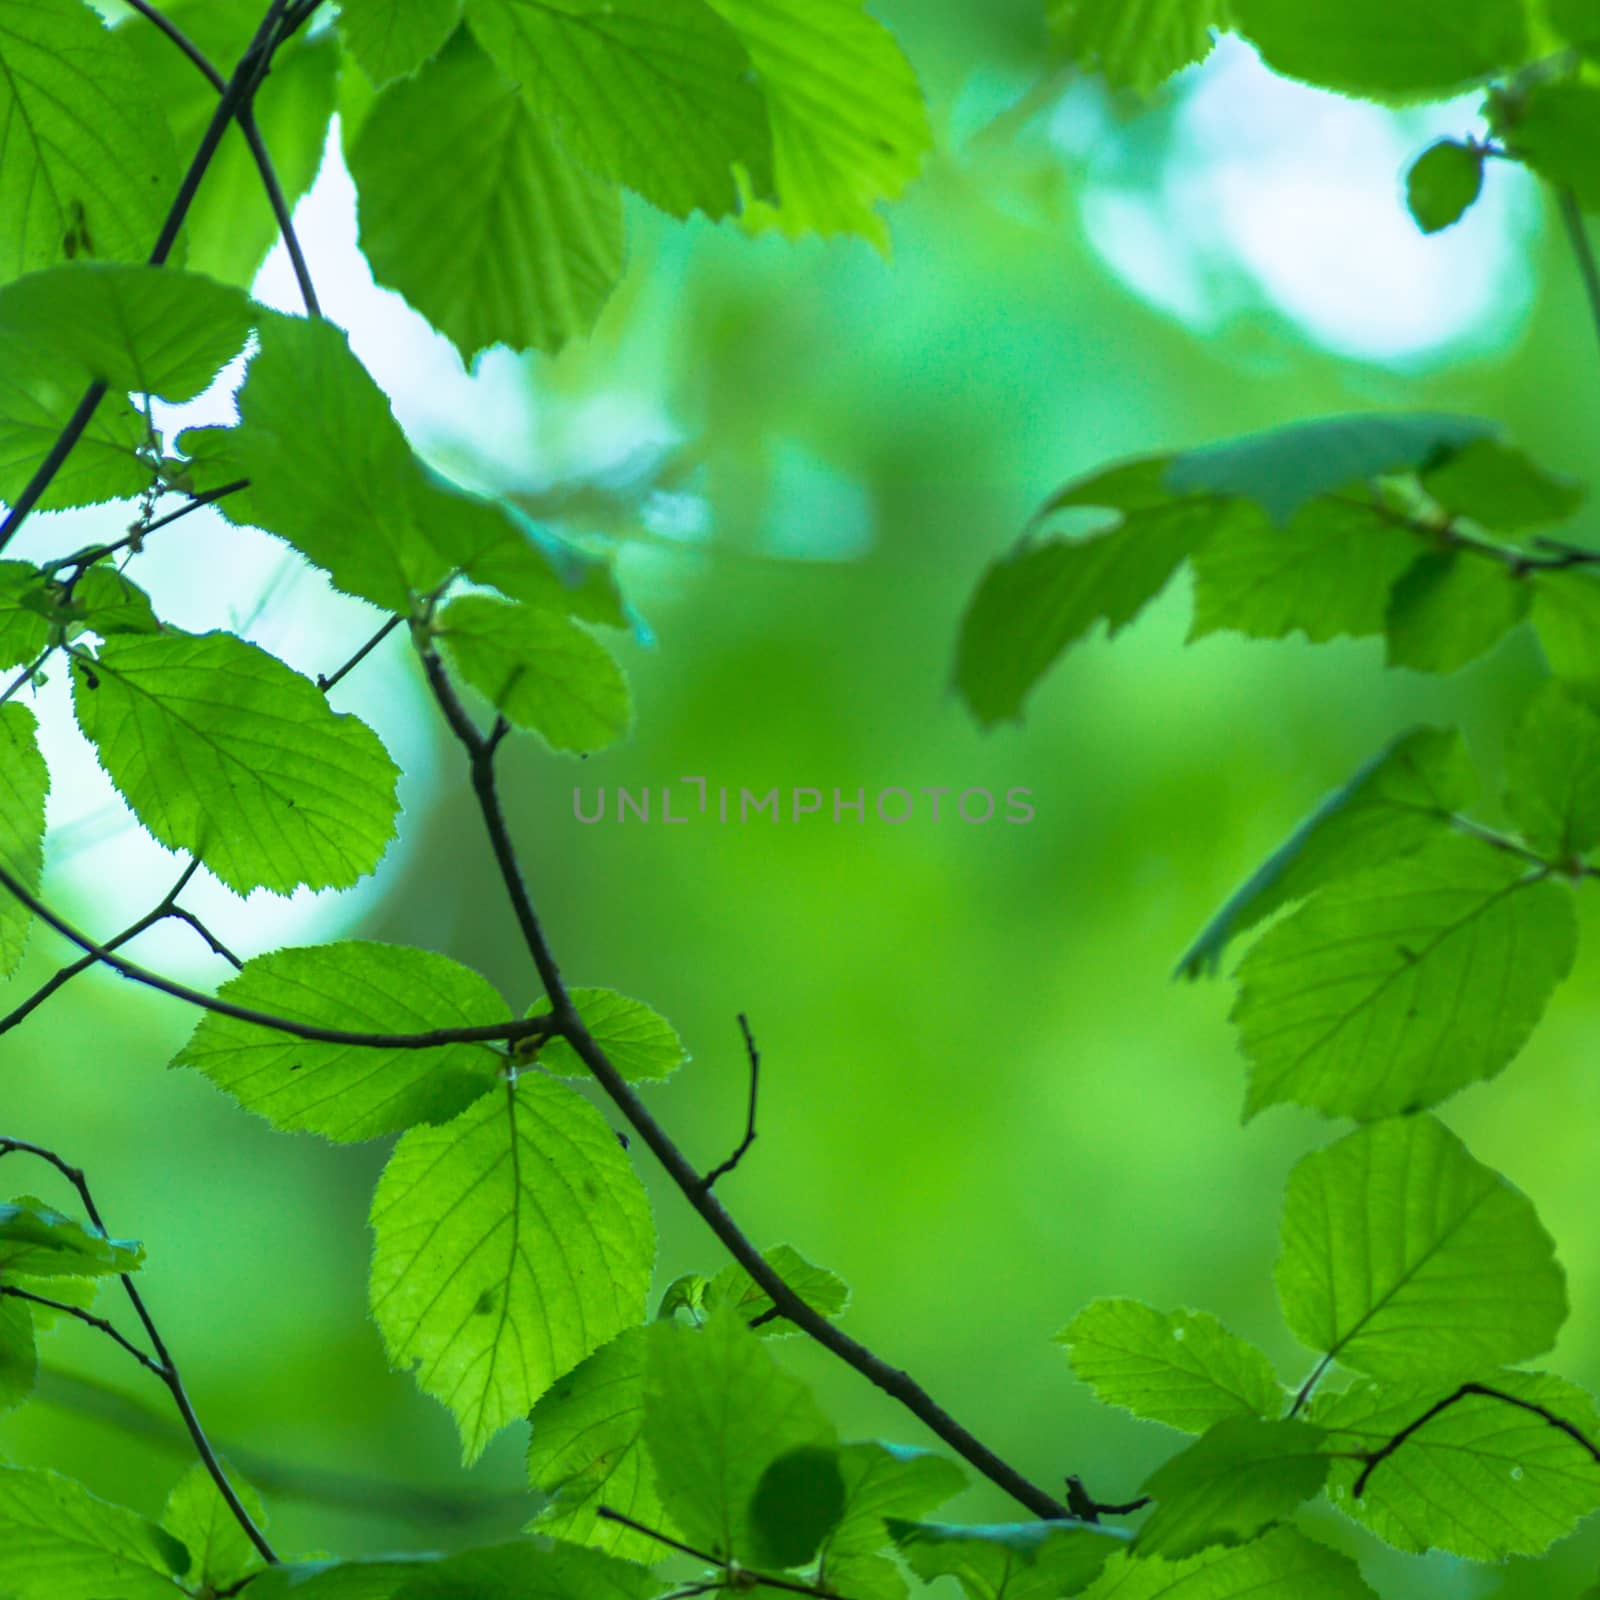 natural background with colored leaves, nature series